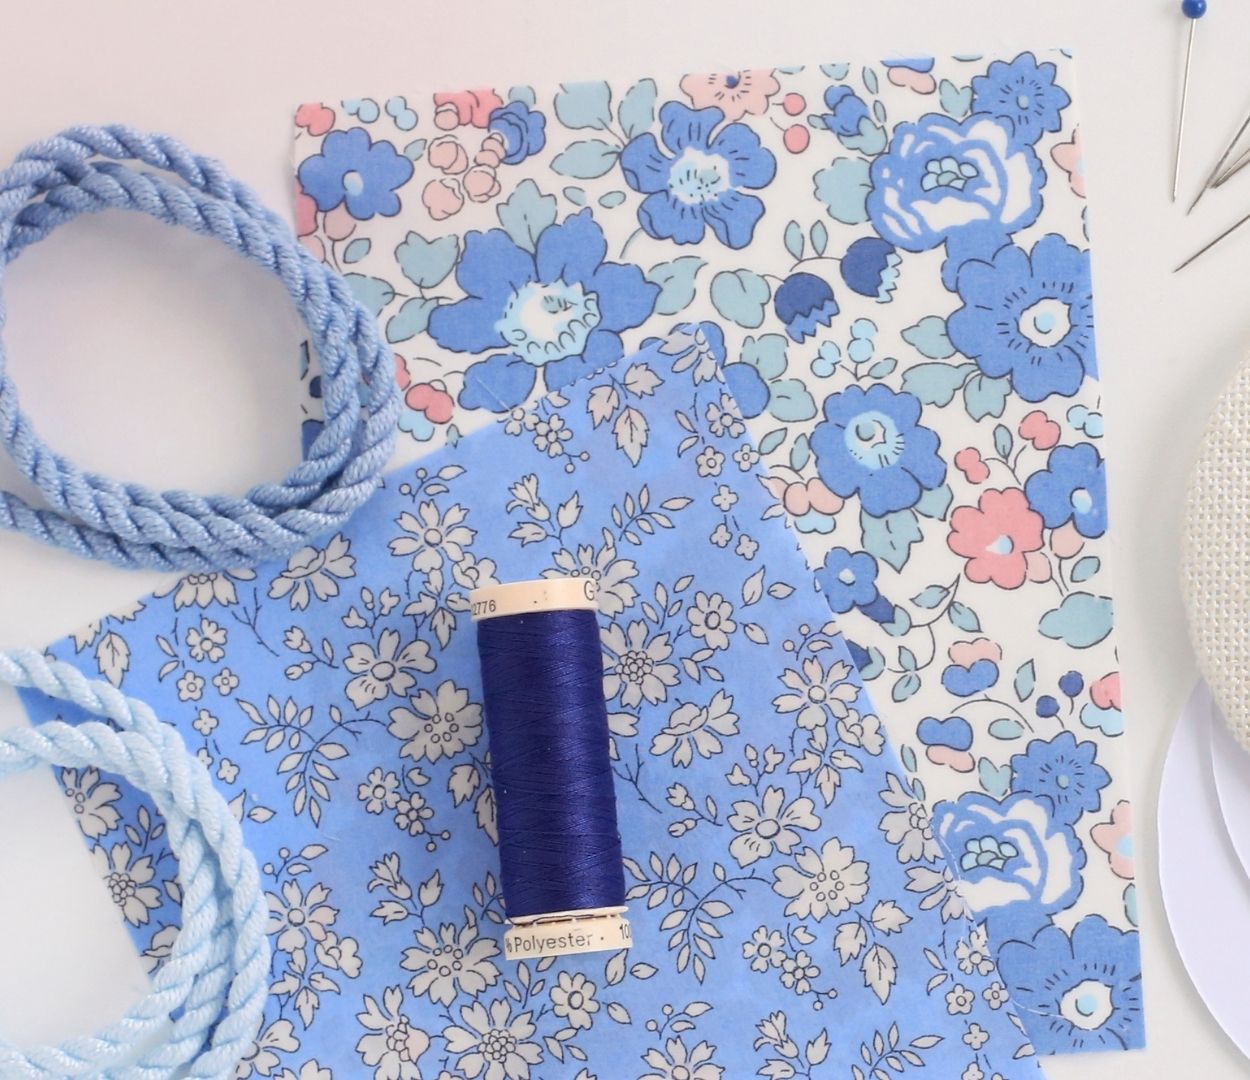 Needlepoint supplies including blue floral finishing fabric, blue finishing thread, and blue cording.